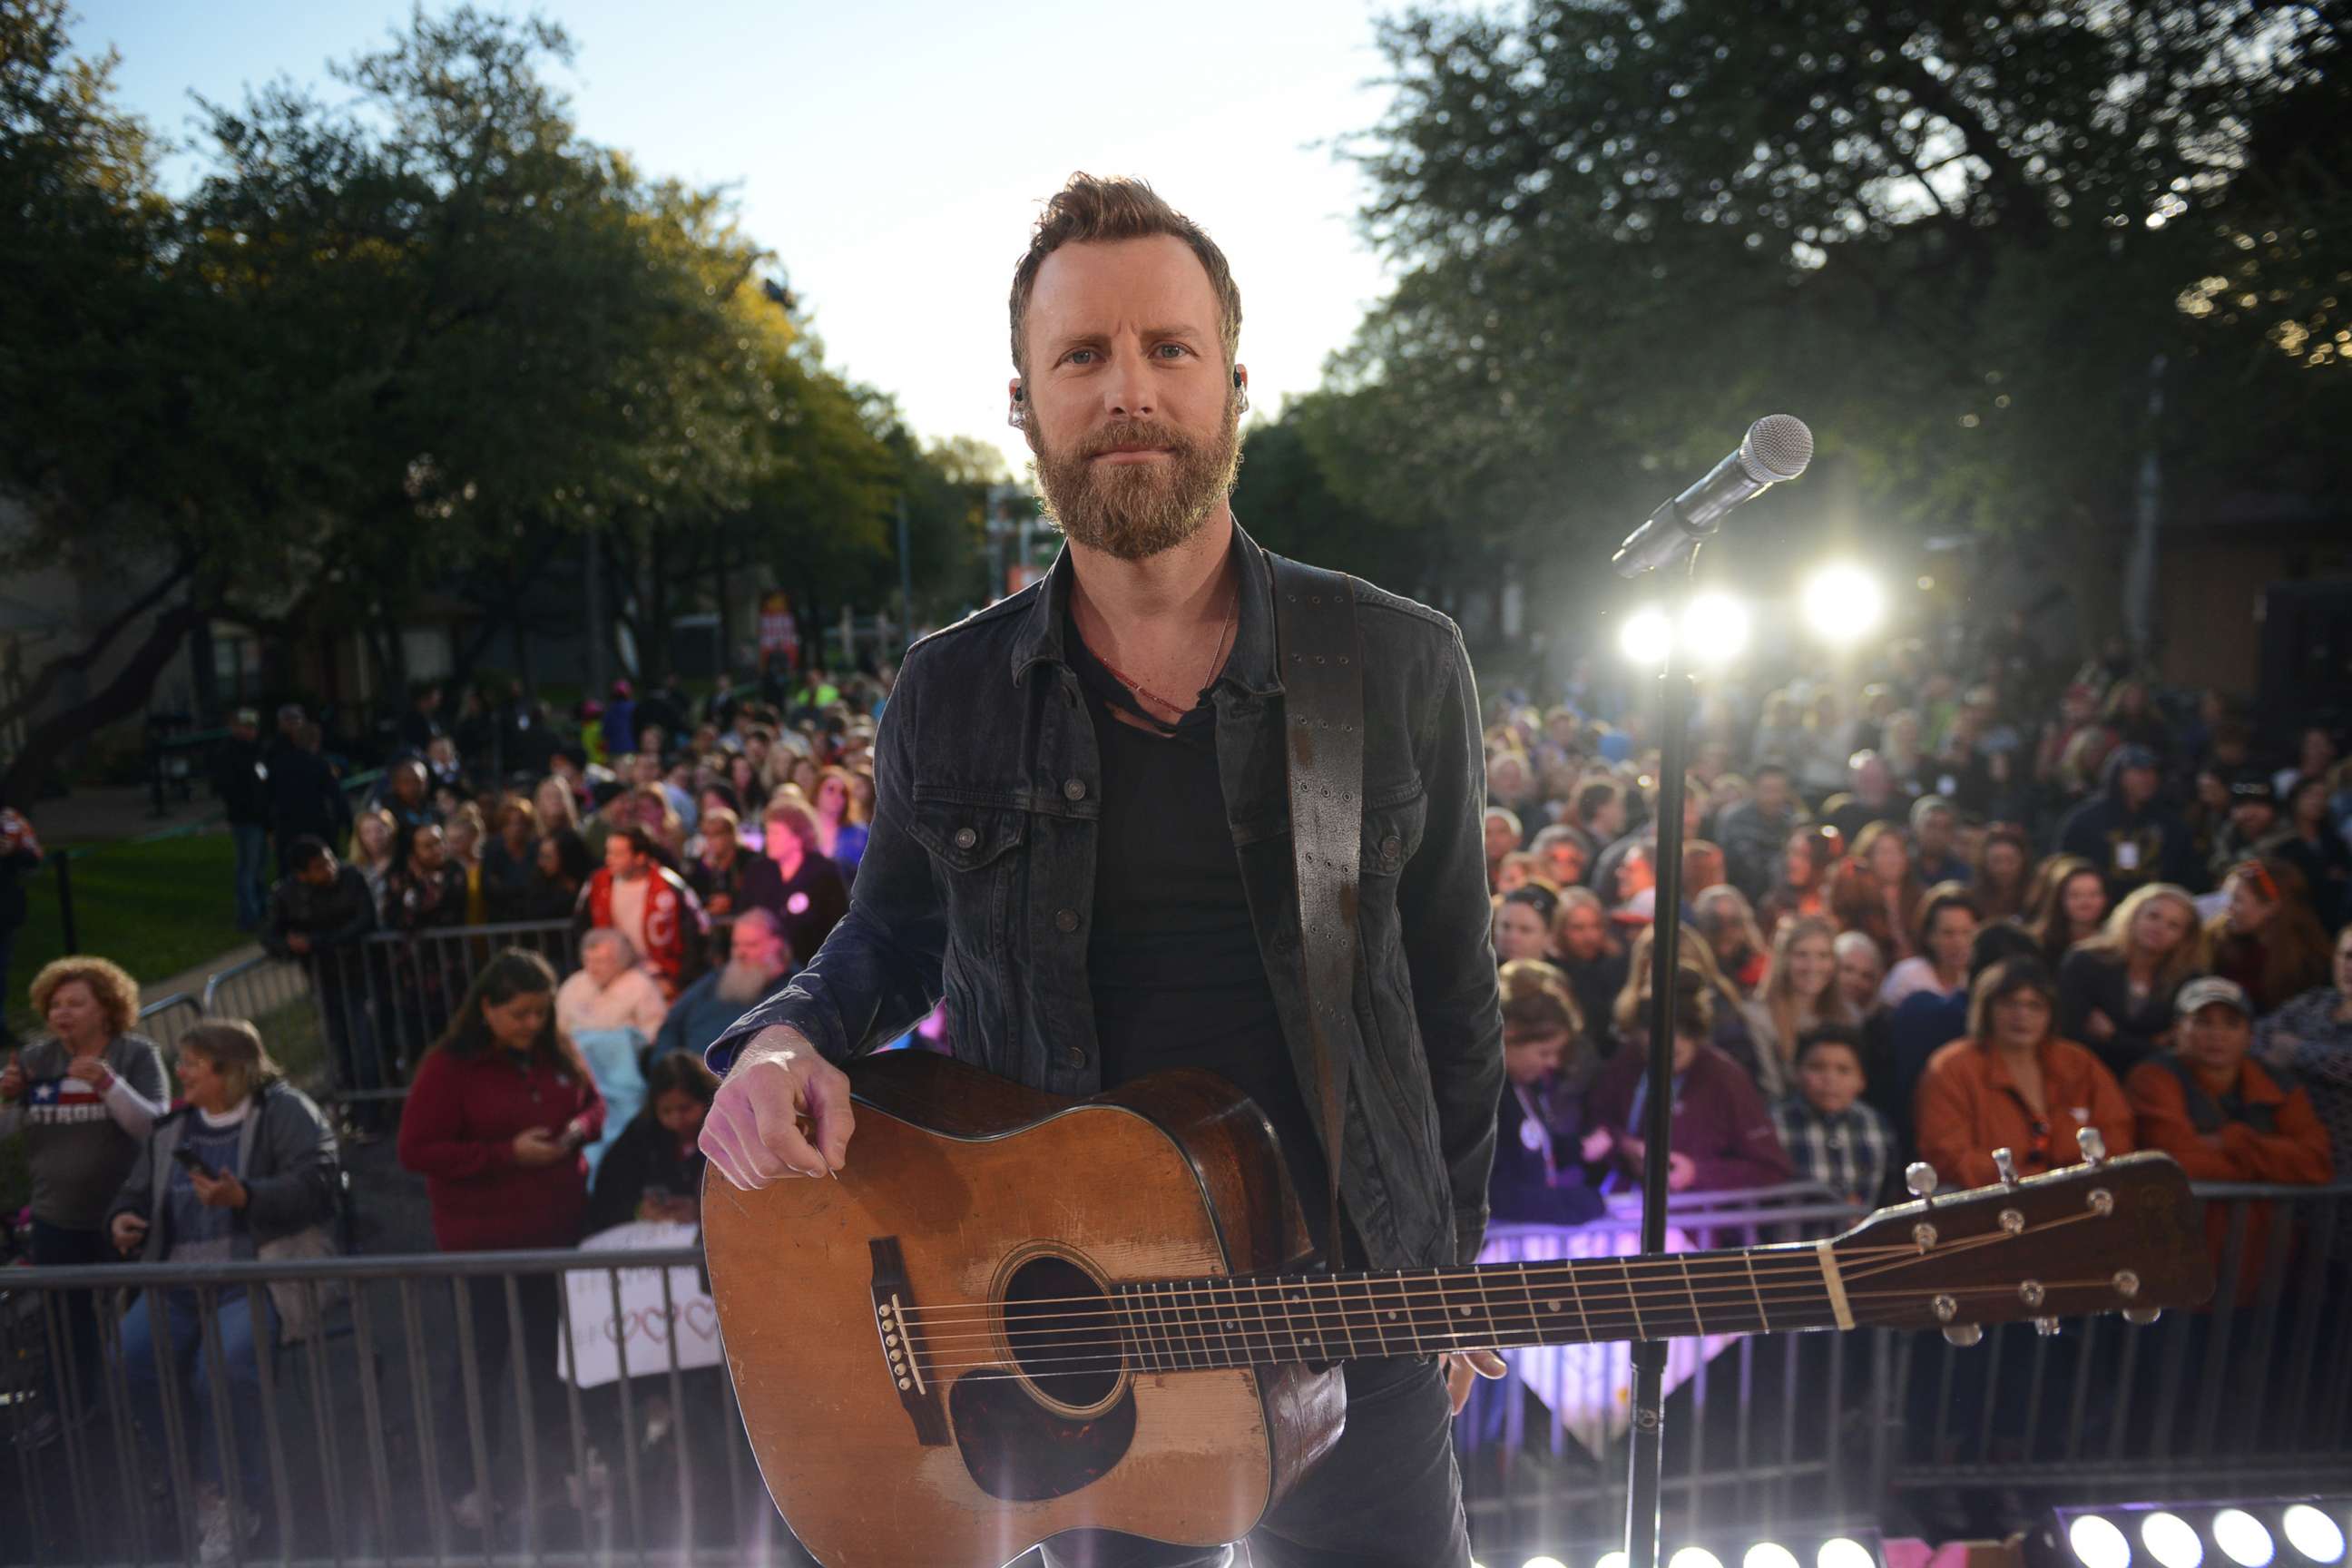 PHOTO: Country music superstar Dierks Bentley woke up the neighborhood on Riverside Drive in Austin, Texas, on Oct. 17, 2017 when he performed live at a block party on "Good Morning America."